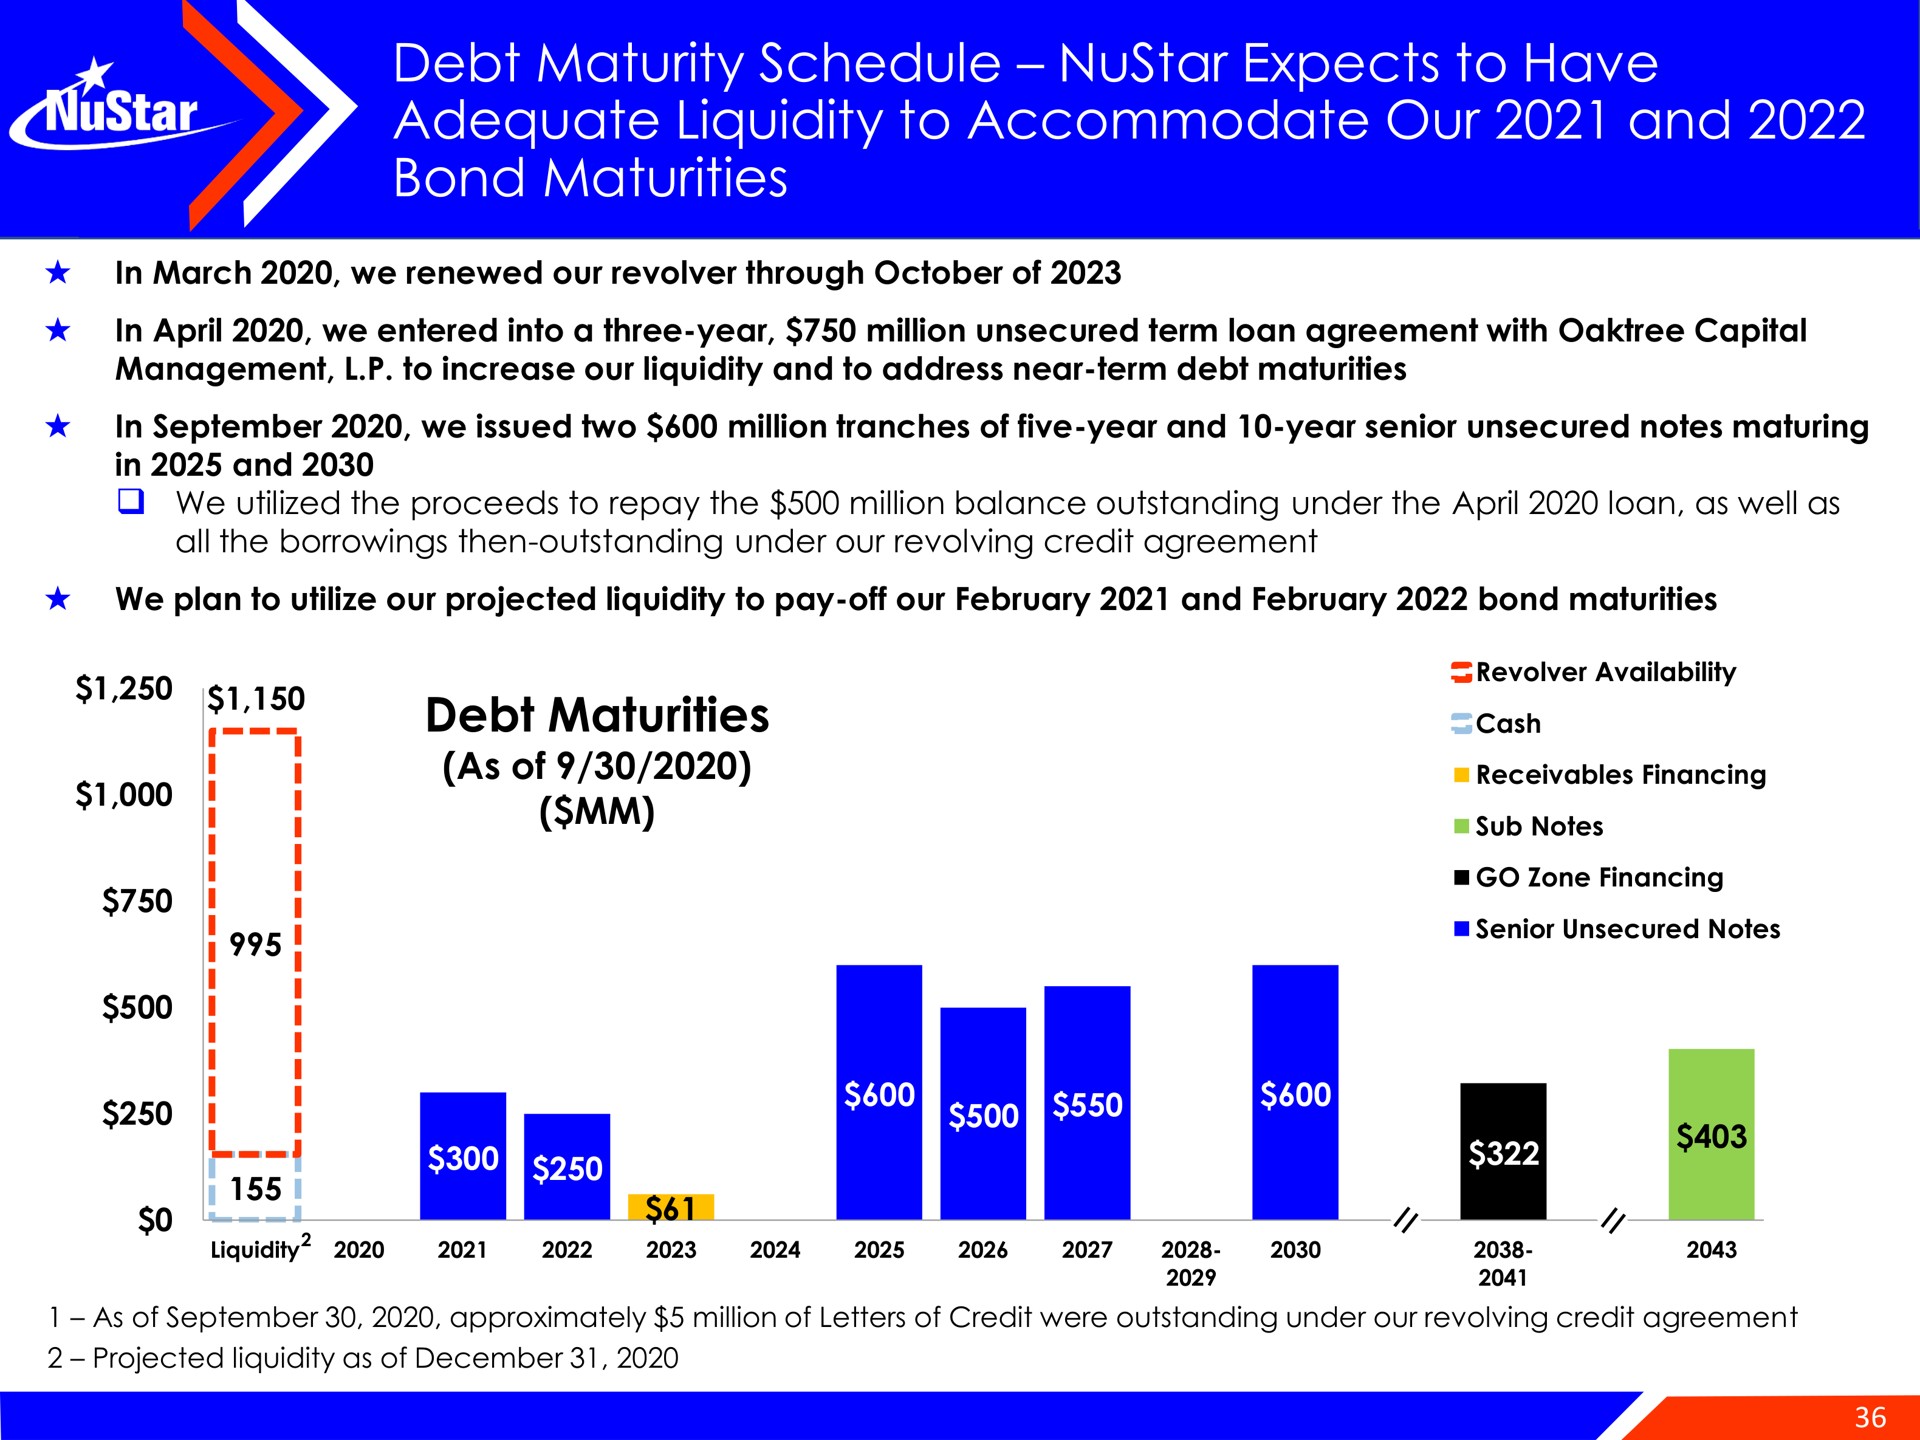 debt maturity schedule expects to have adequate liquidity to accommodate our and bond maturities debt maturities as cosh | NuStar Energy